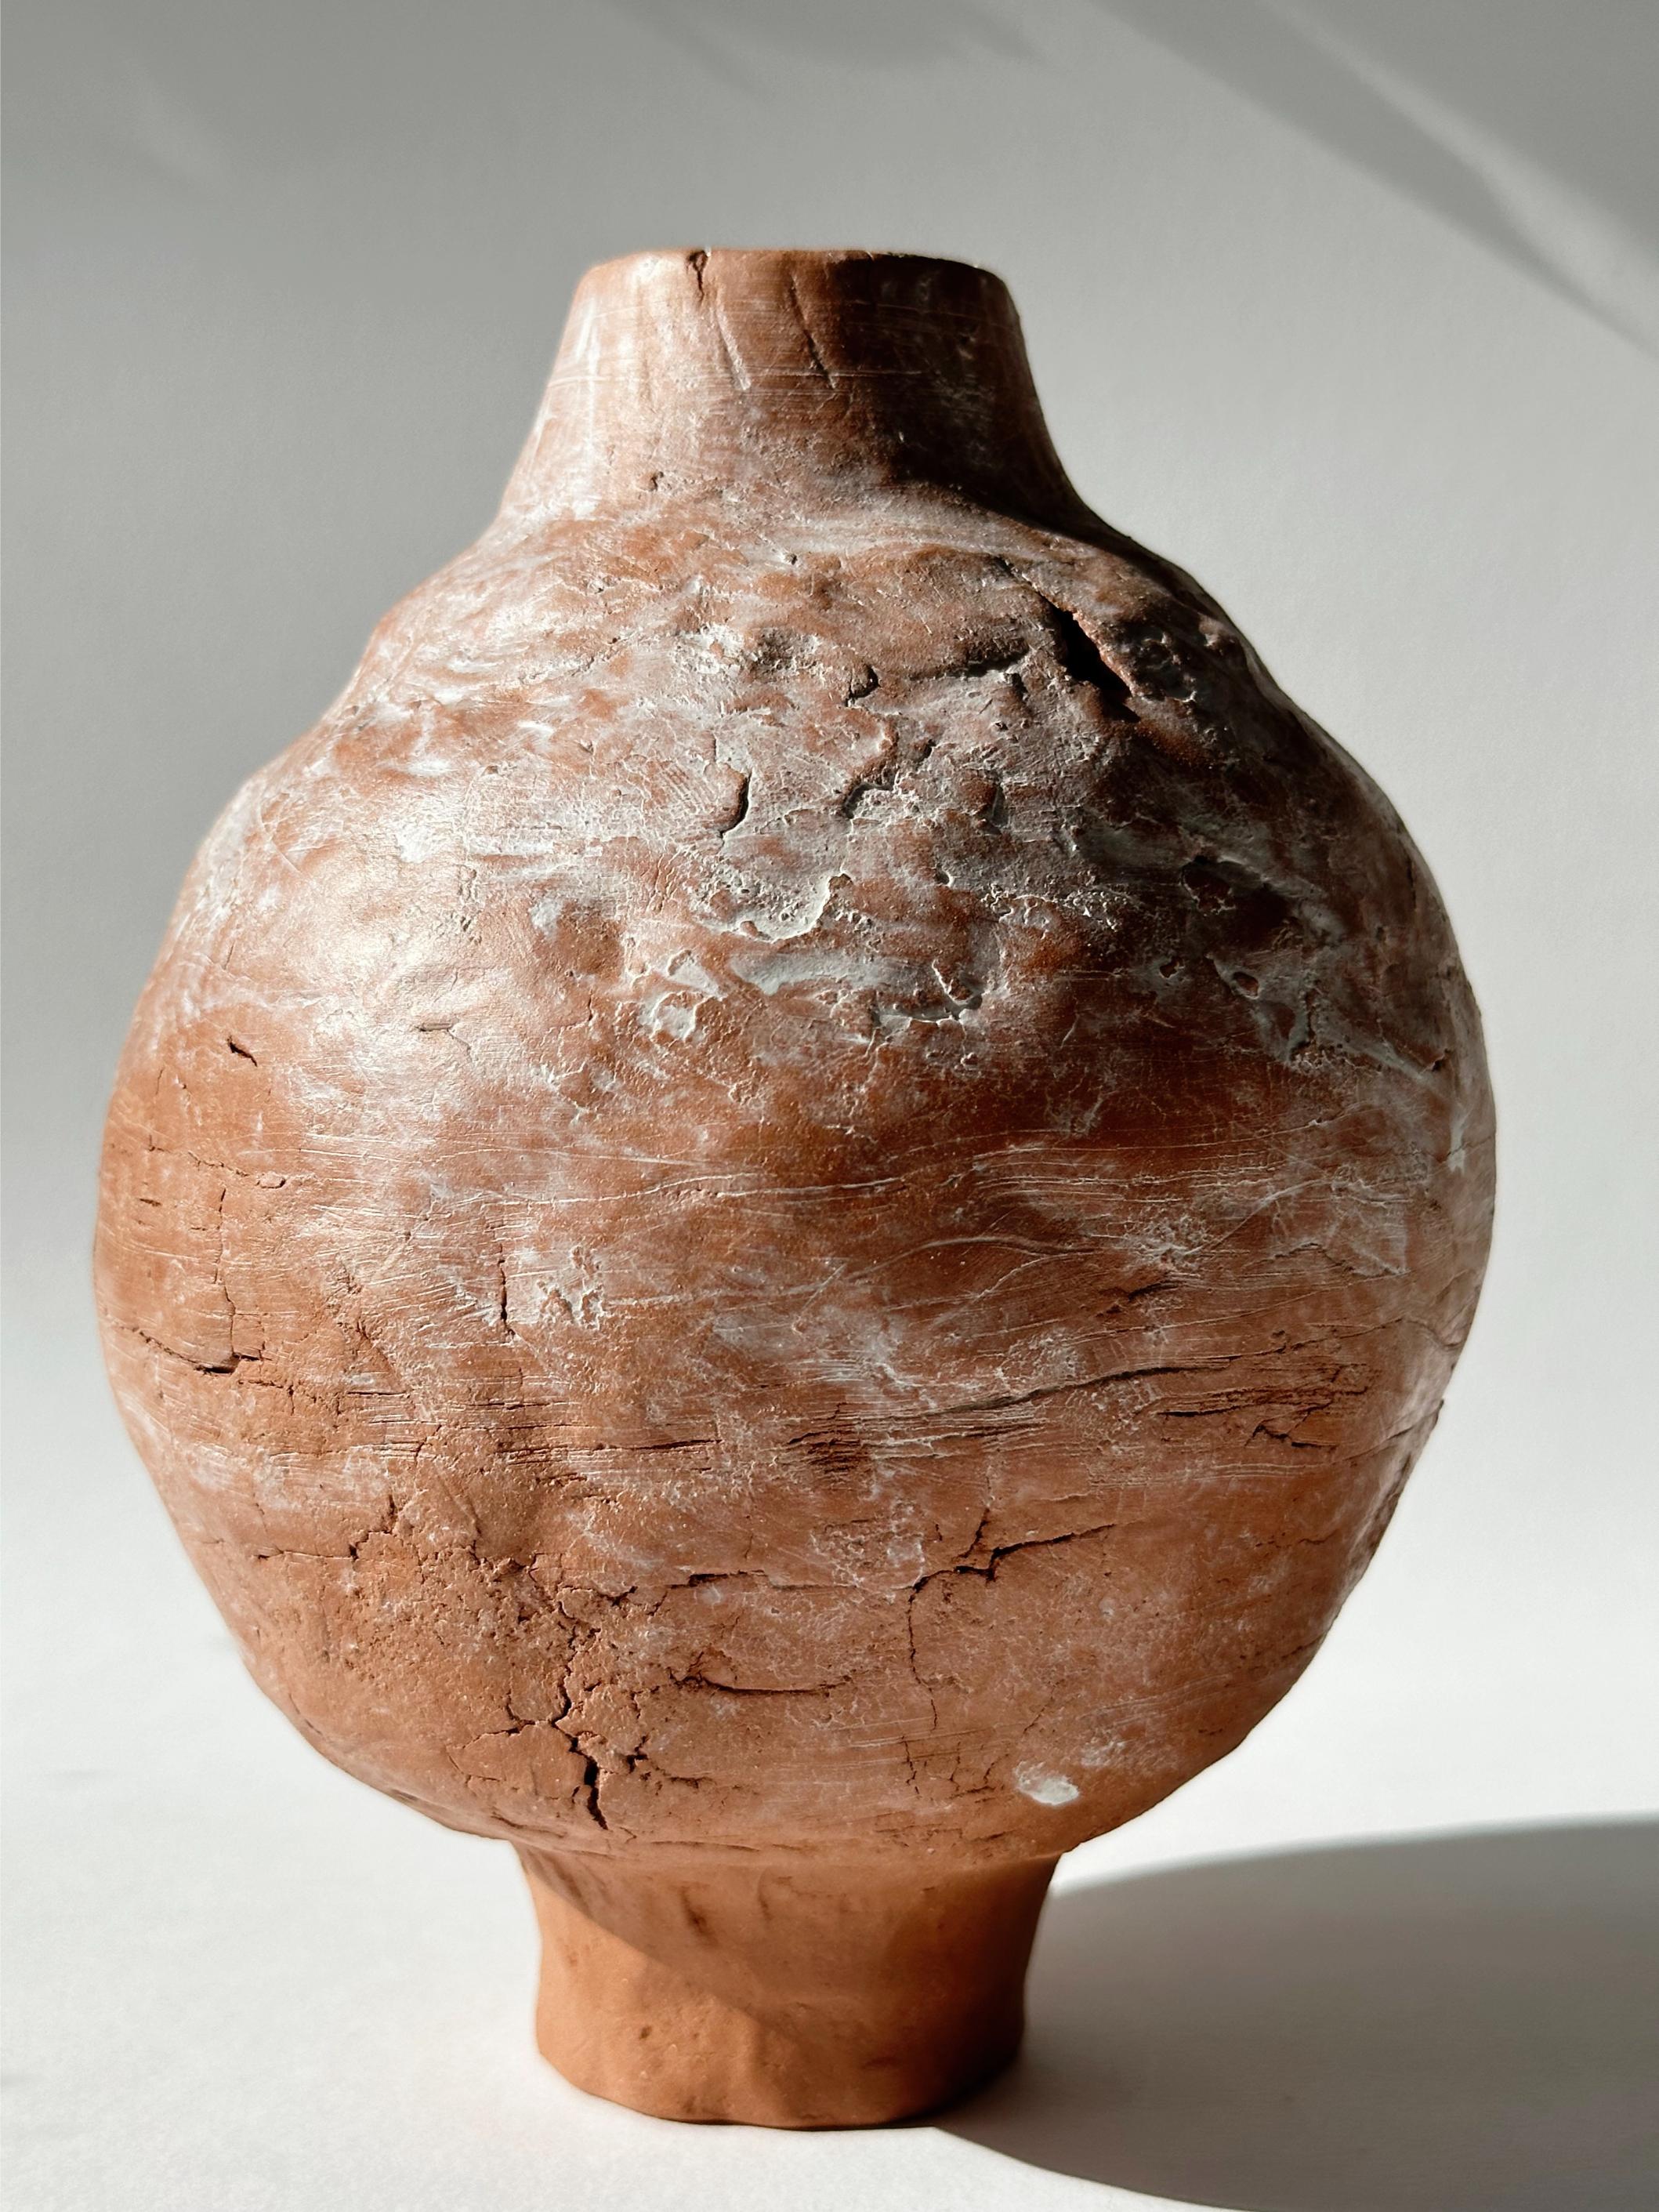 Terracotta Moon Jar No 4 by Elena Vasilantonaki
Unique
Dimensions: ⌀ 14.5 x H 18.5 cm (Dimensions may vary)
Materials: Local Terracotta Clay from the Island of
Crete

Growing up in Greece I was surrounded by pottery forms that have changed little